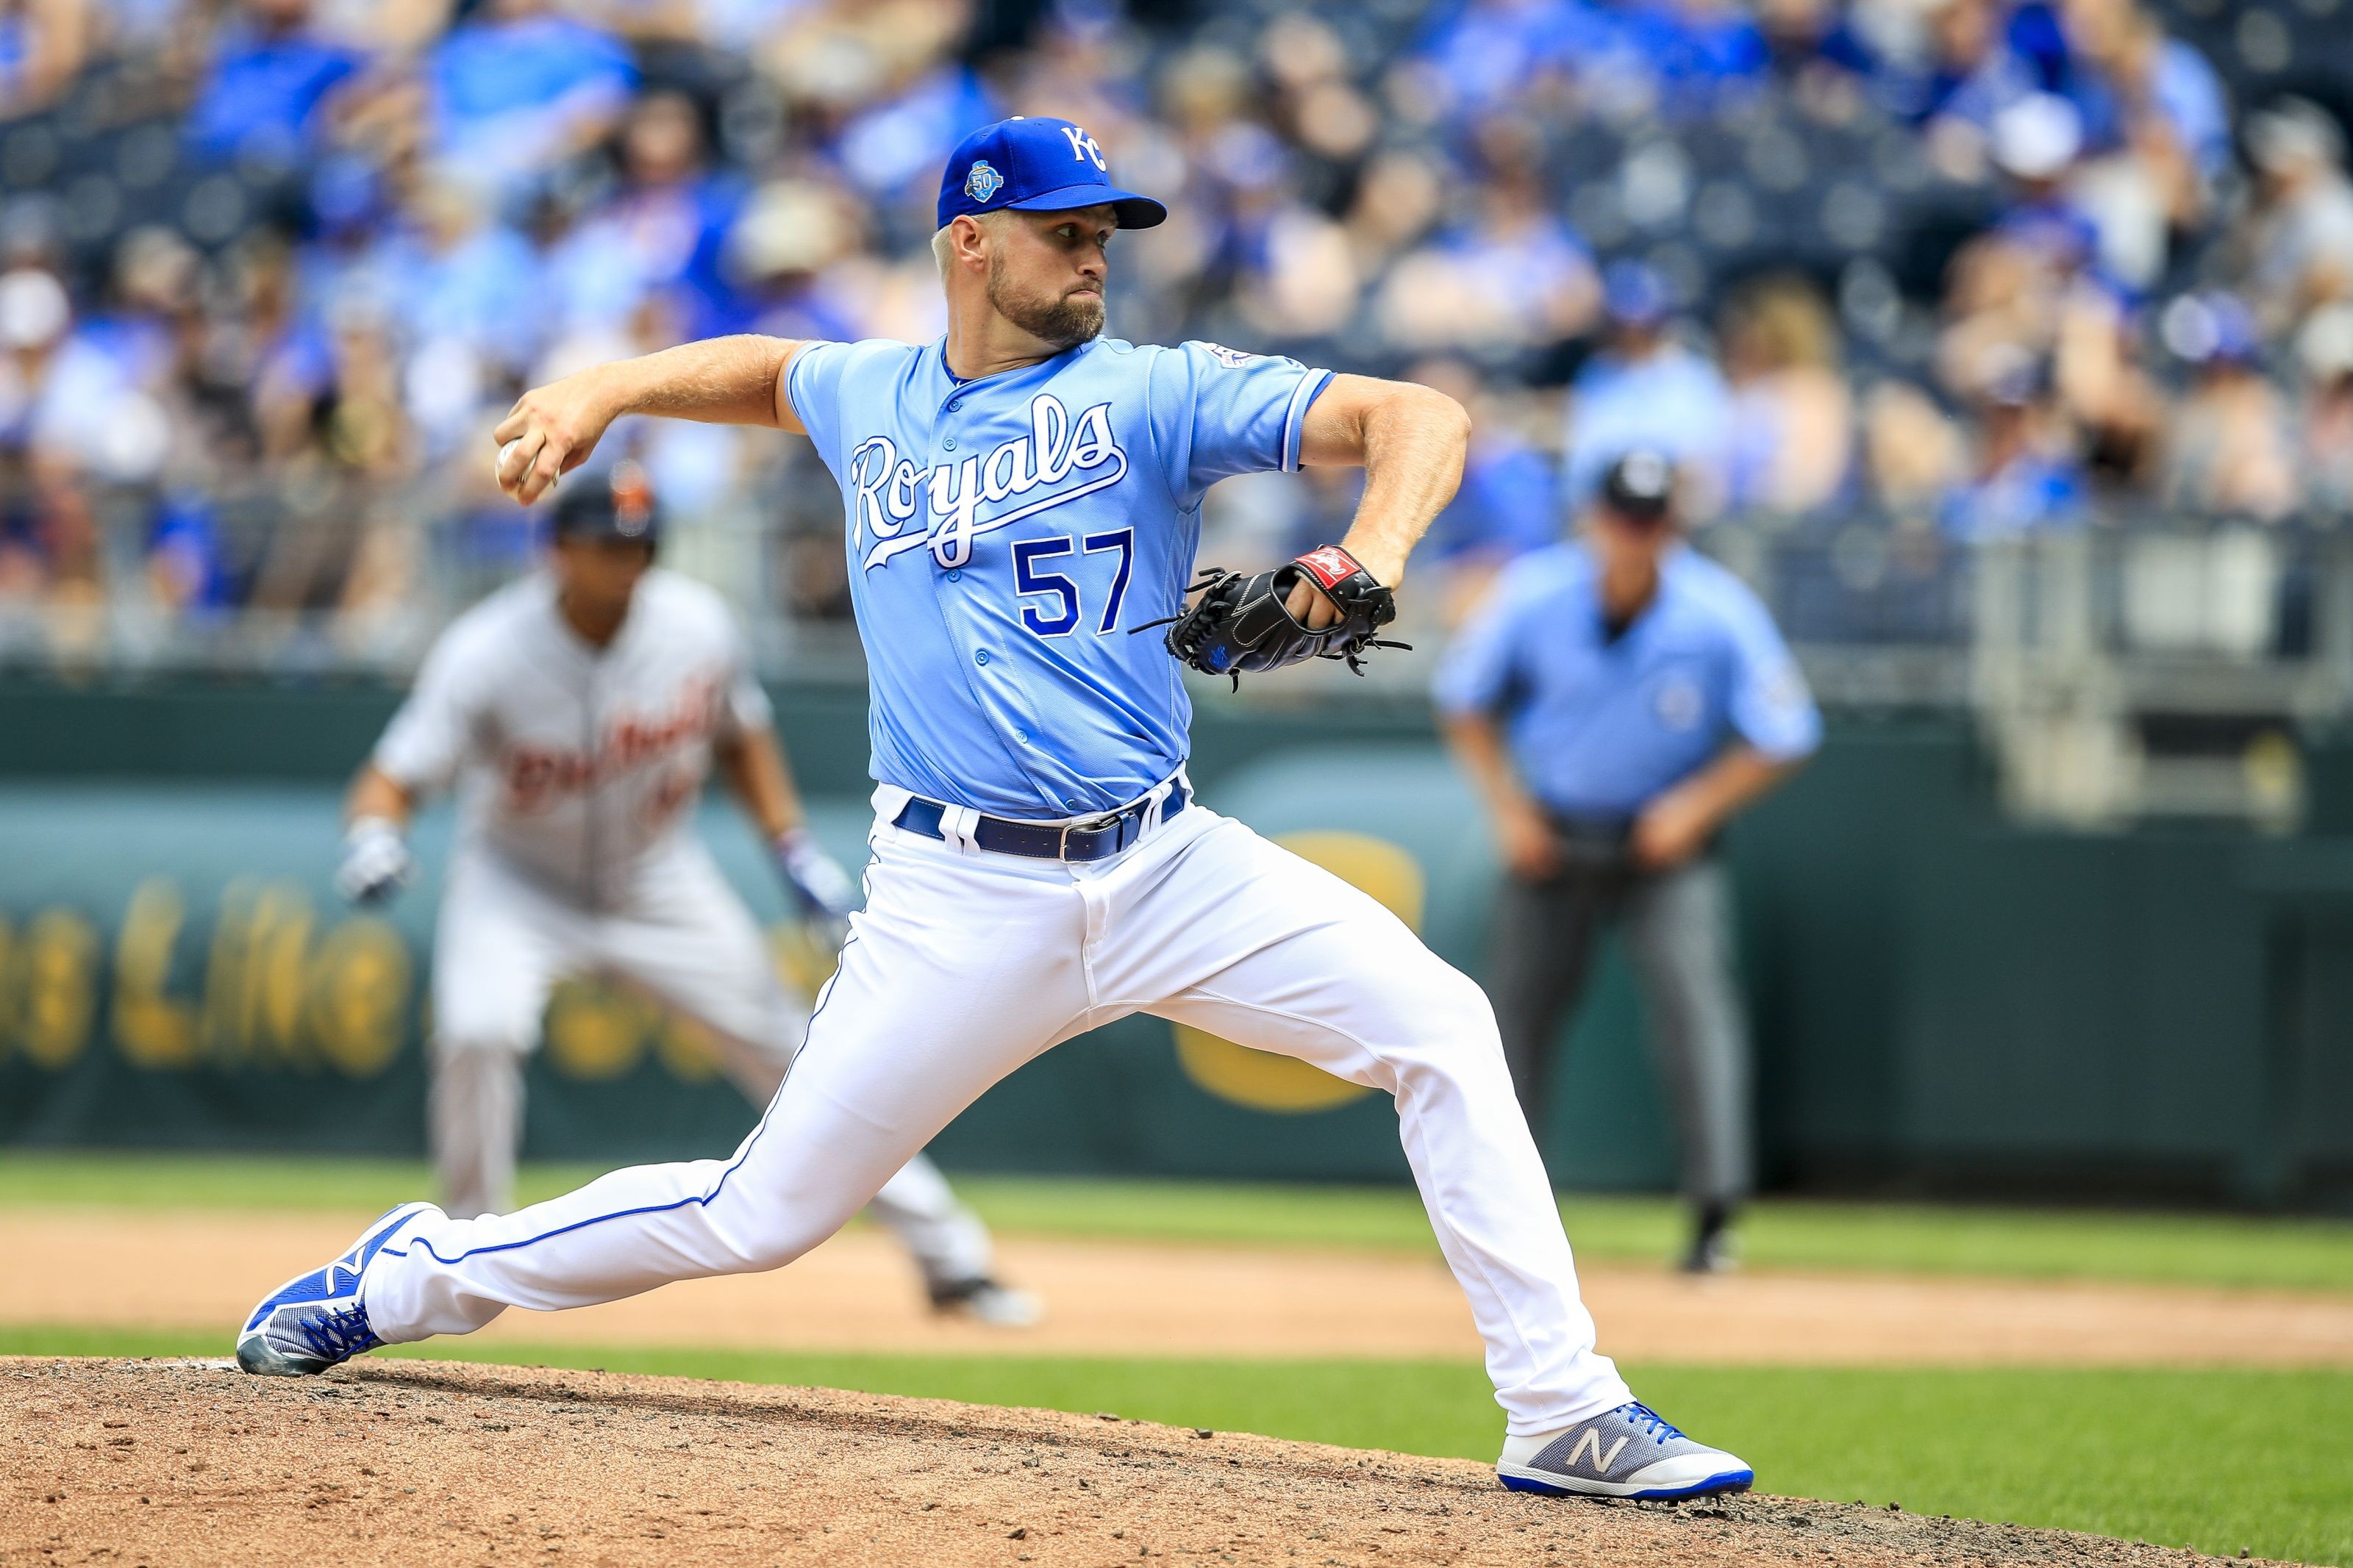 Kansas City Royals Pitchers who have September callup potential